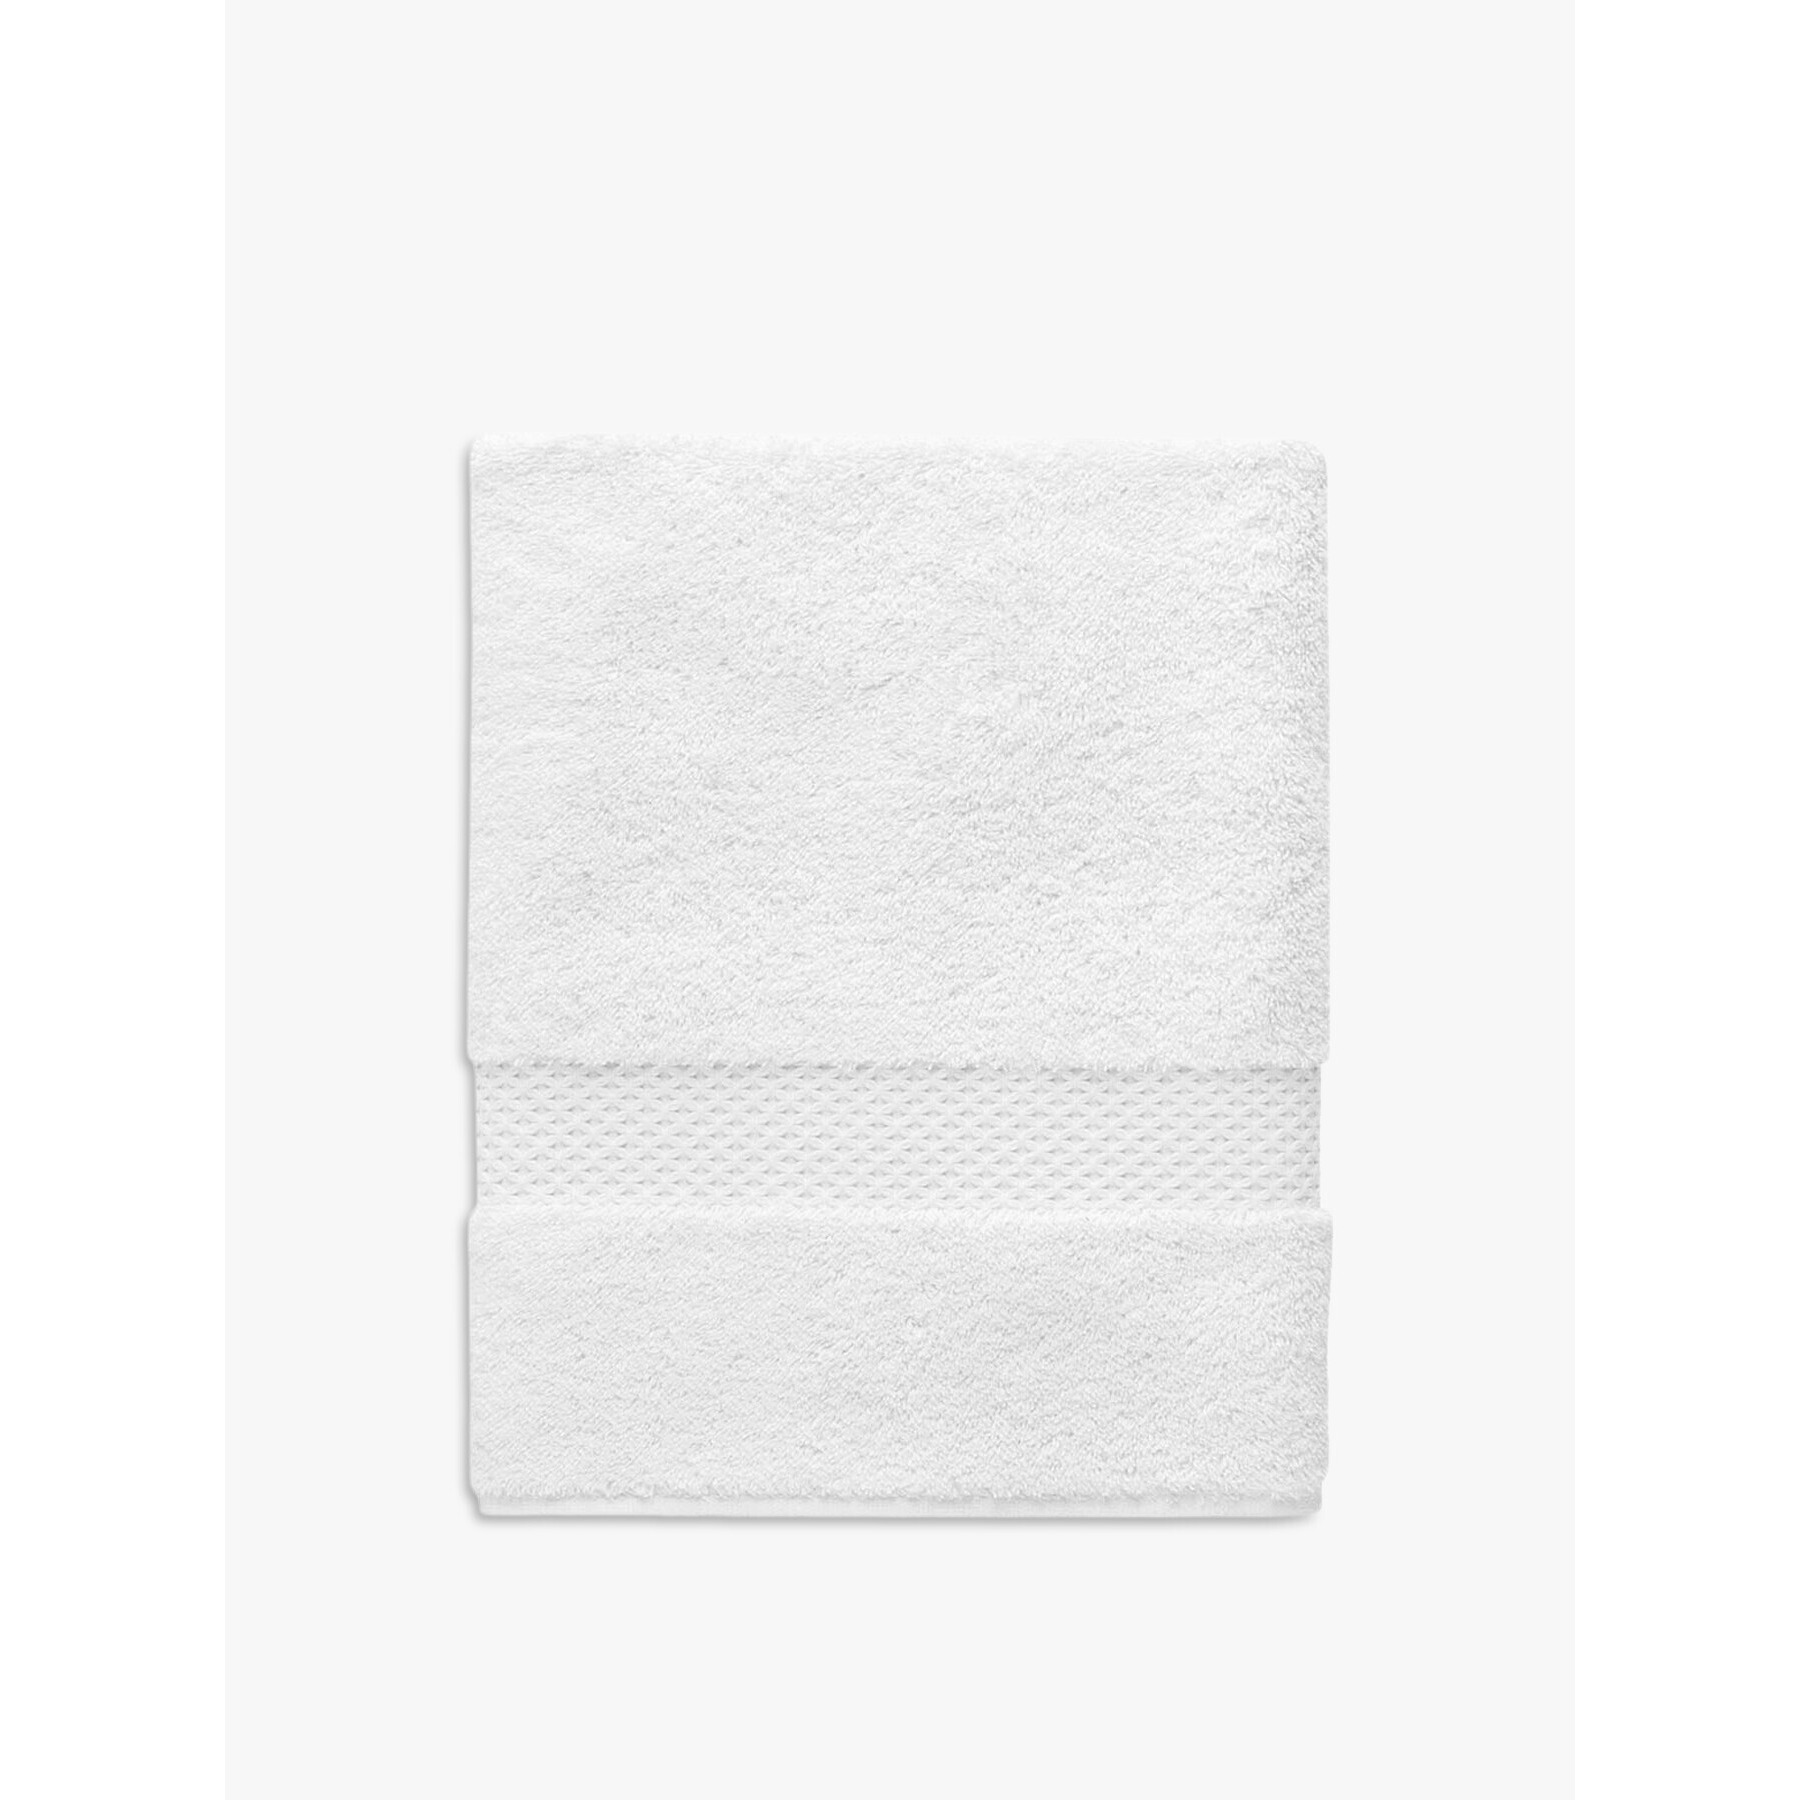 Yves Delorme Etoile Guest Towel - Size 45x70cm White - image 1